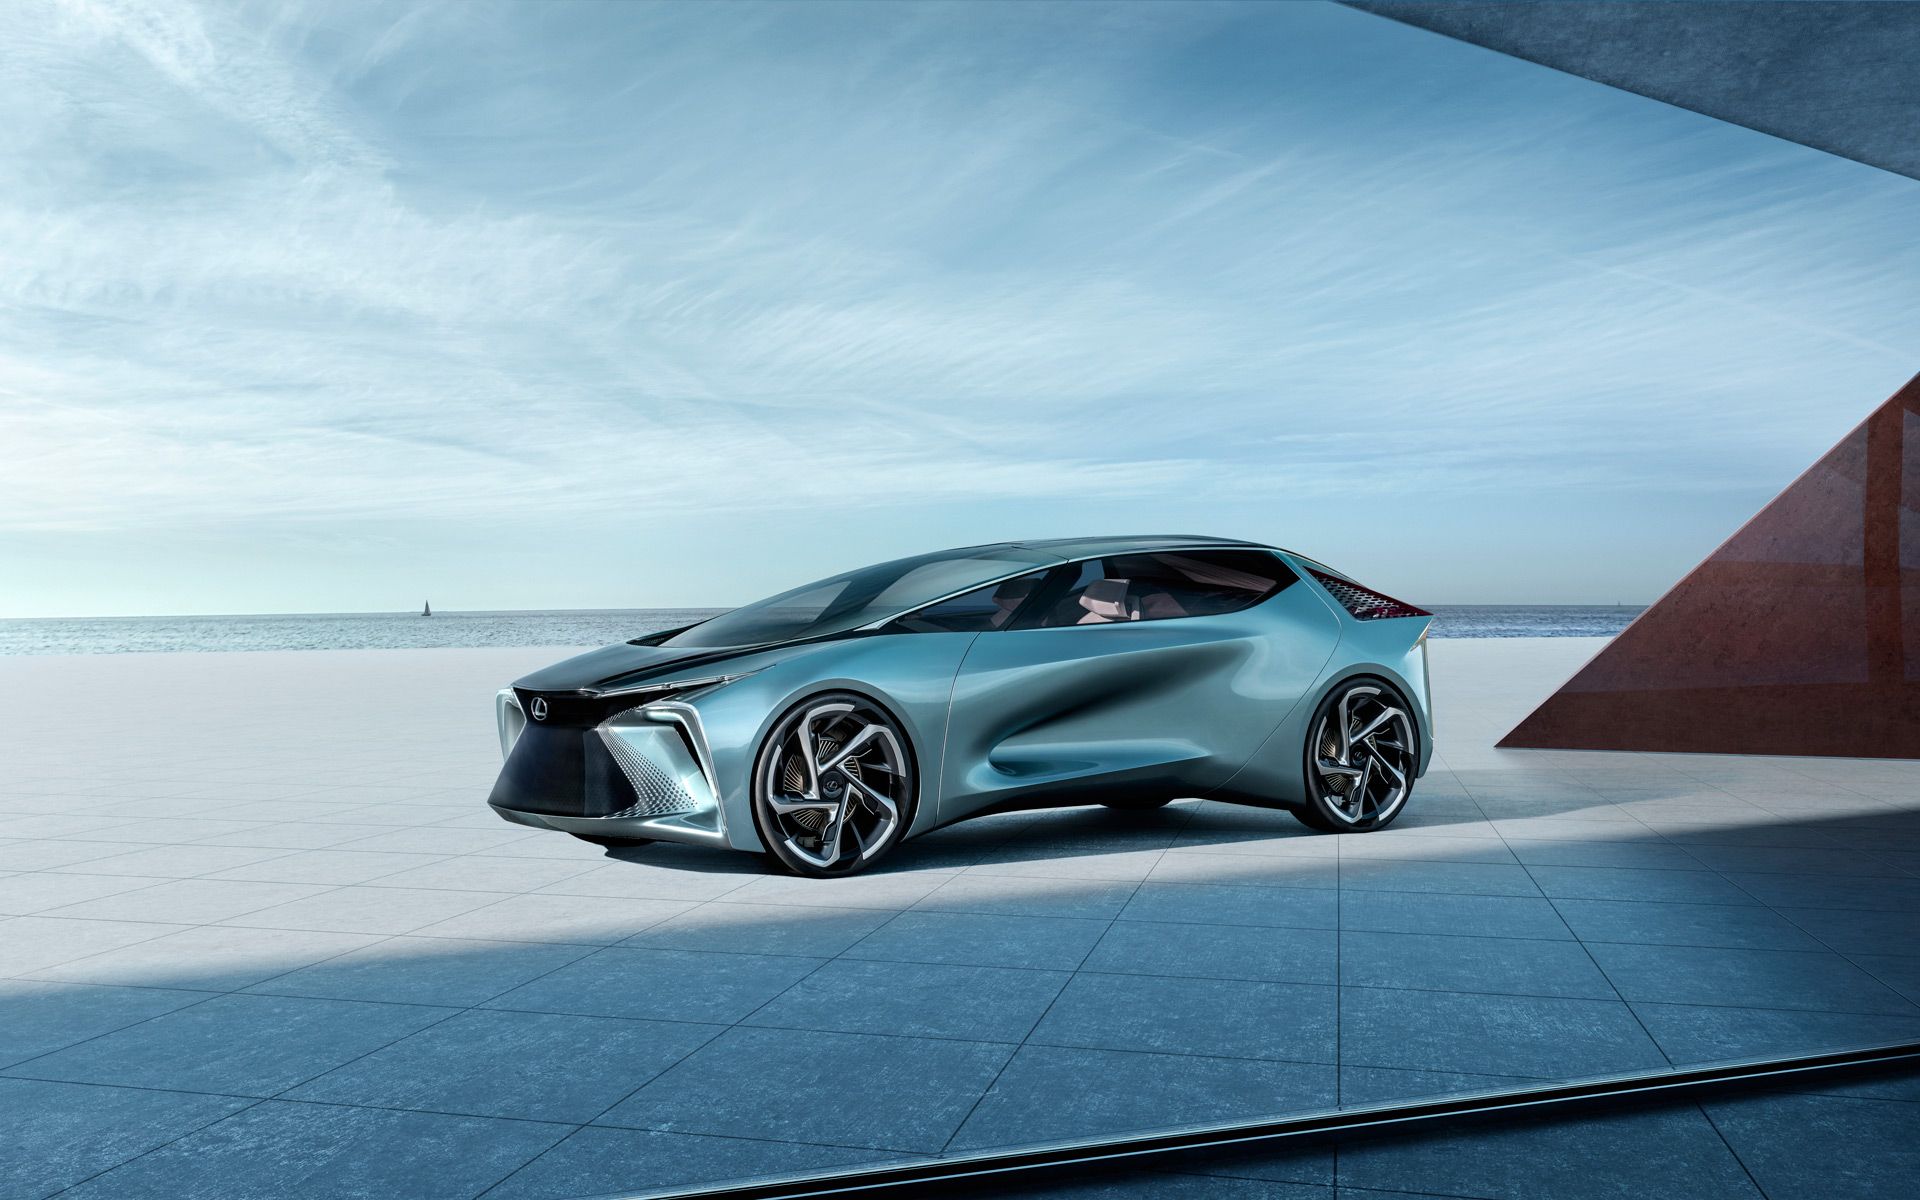 2021 A New Lexus Trademark Hints At A New EV With an Unmentionable Body Style